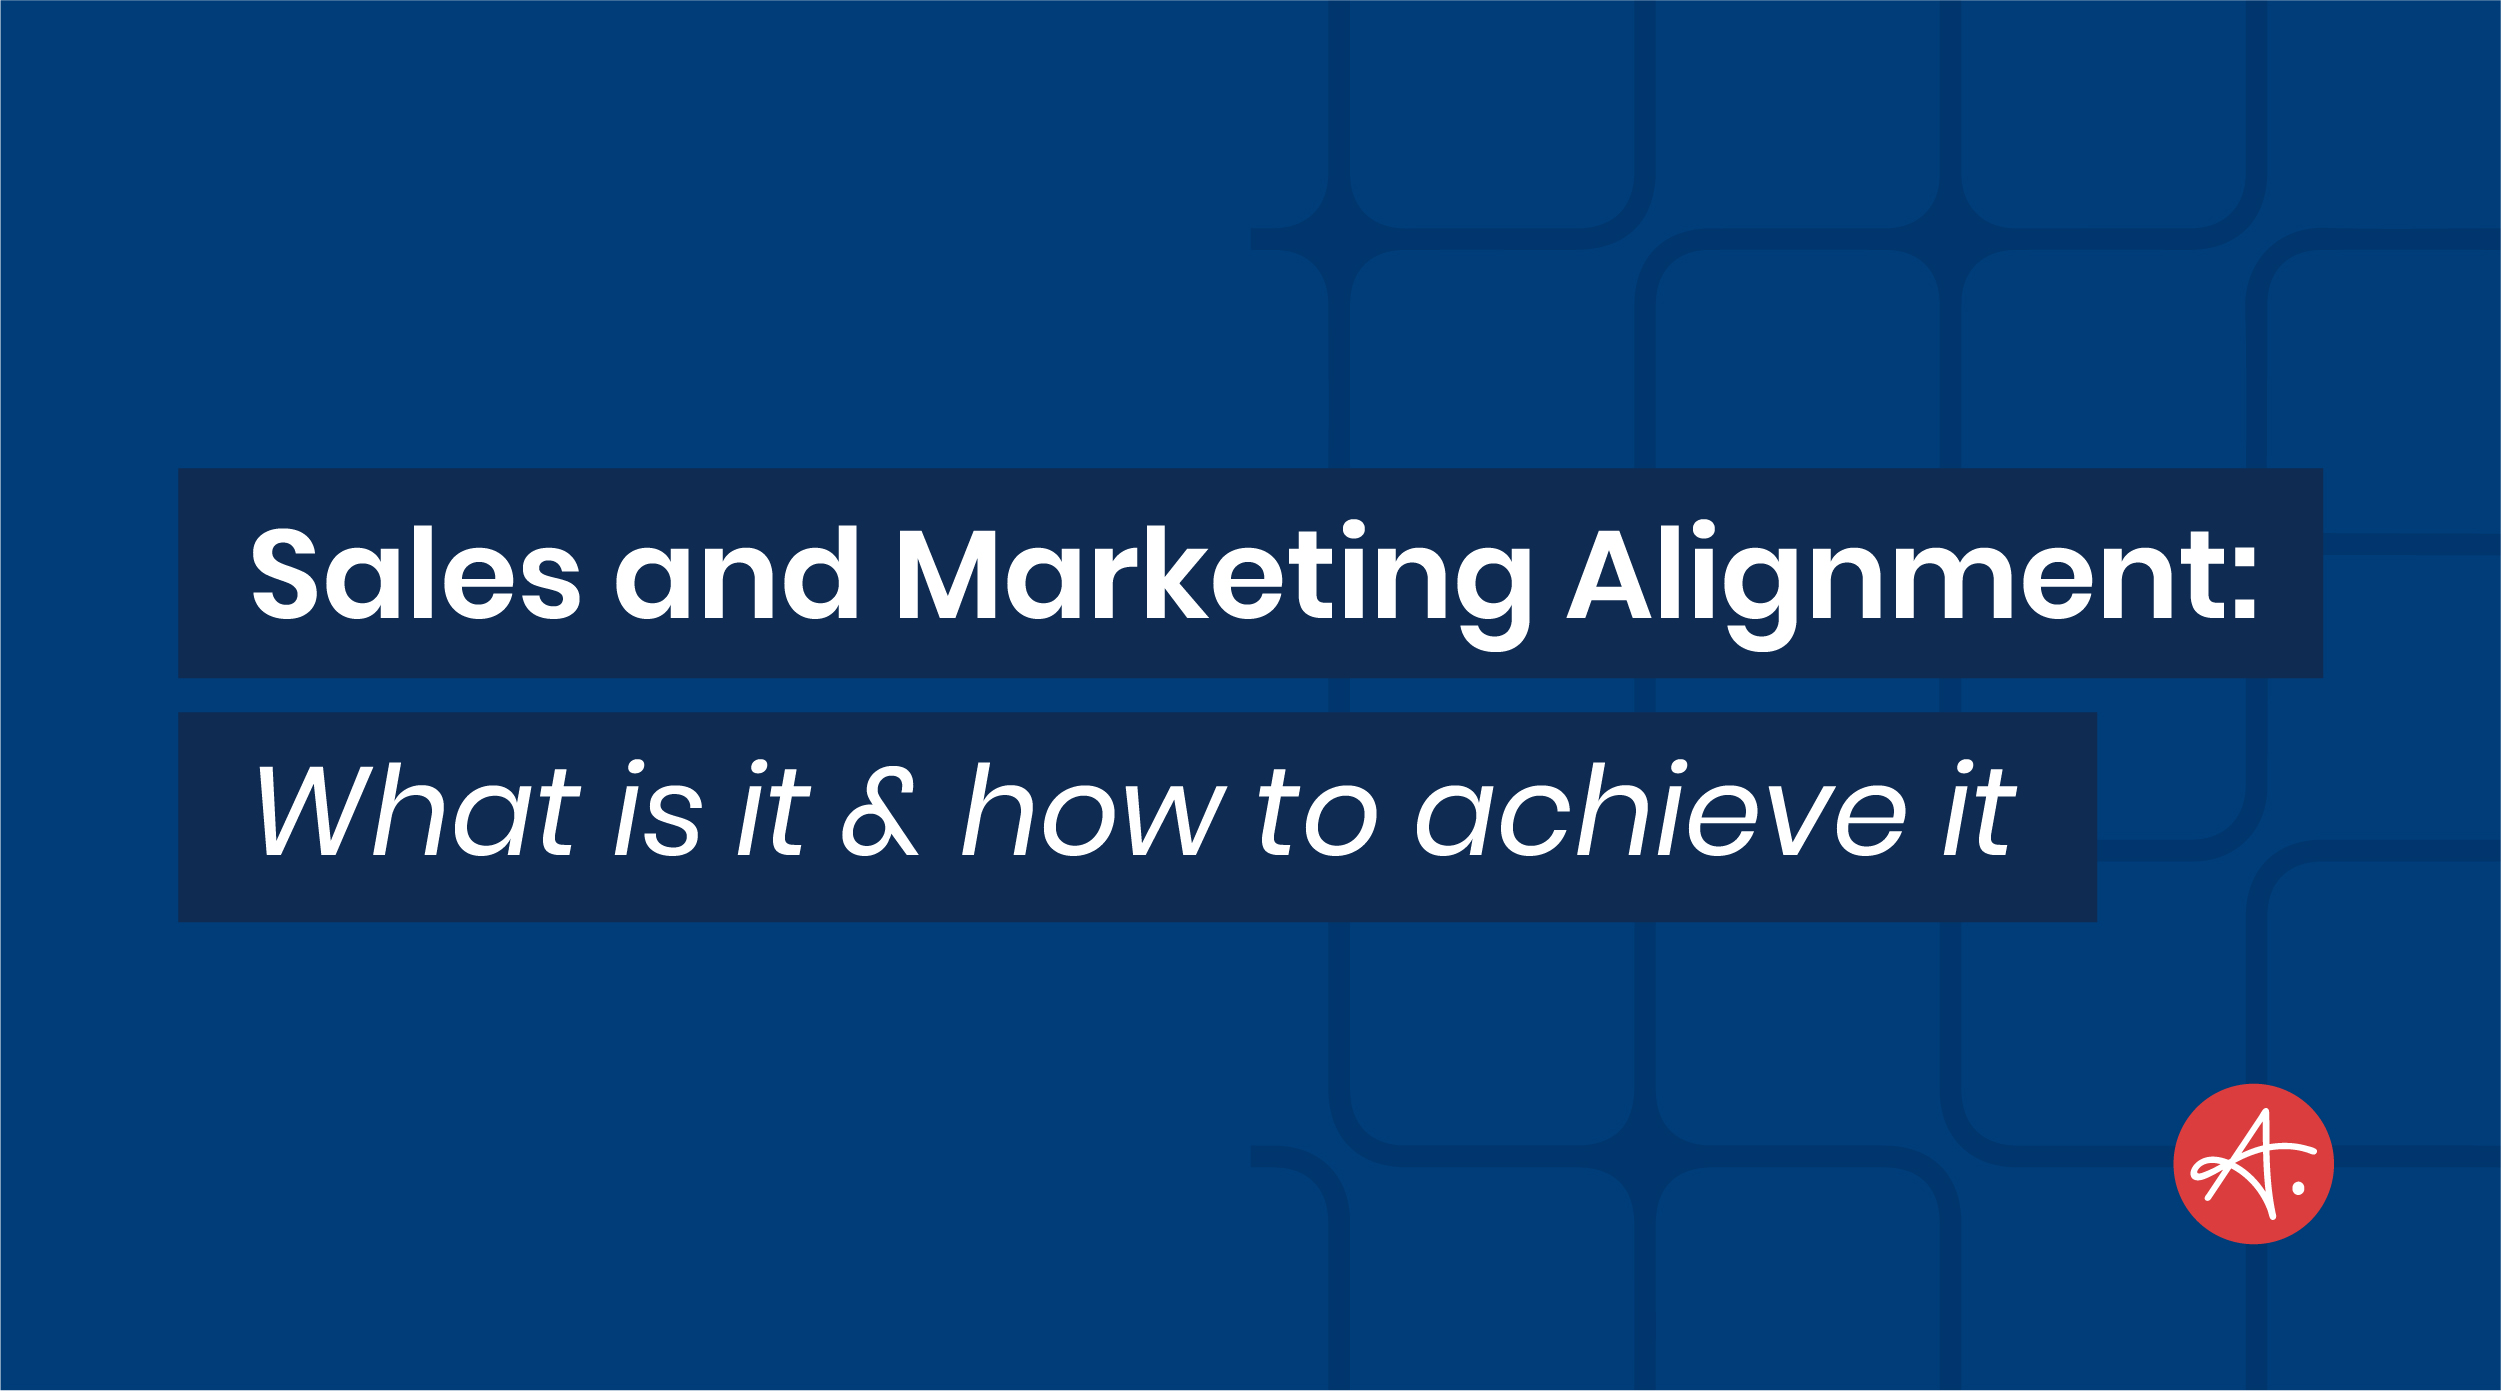 Sales and marketing alignment: What is it & how to achieve it